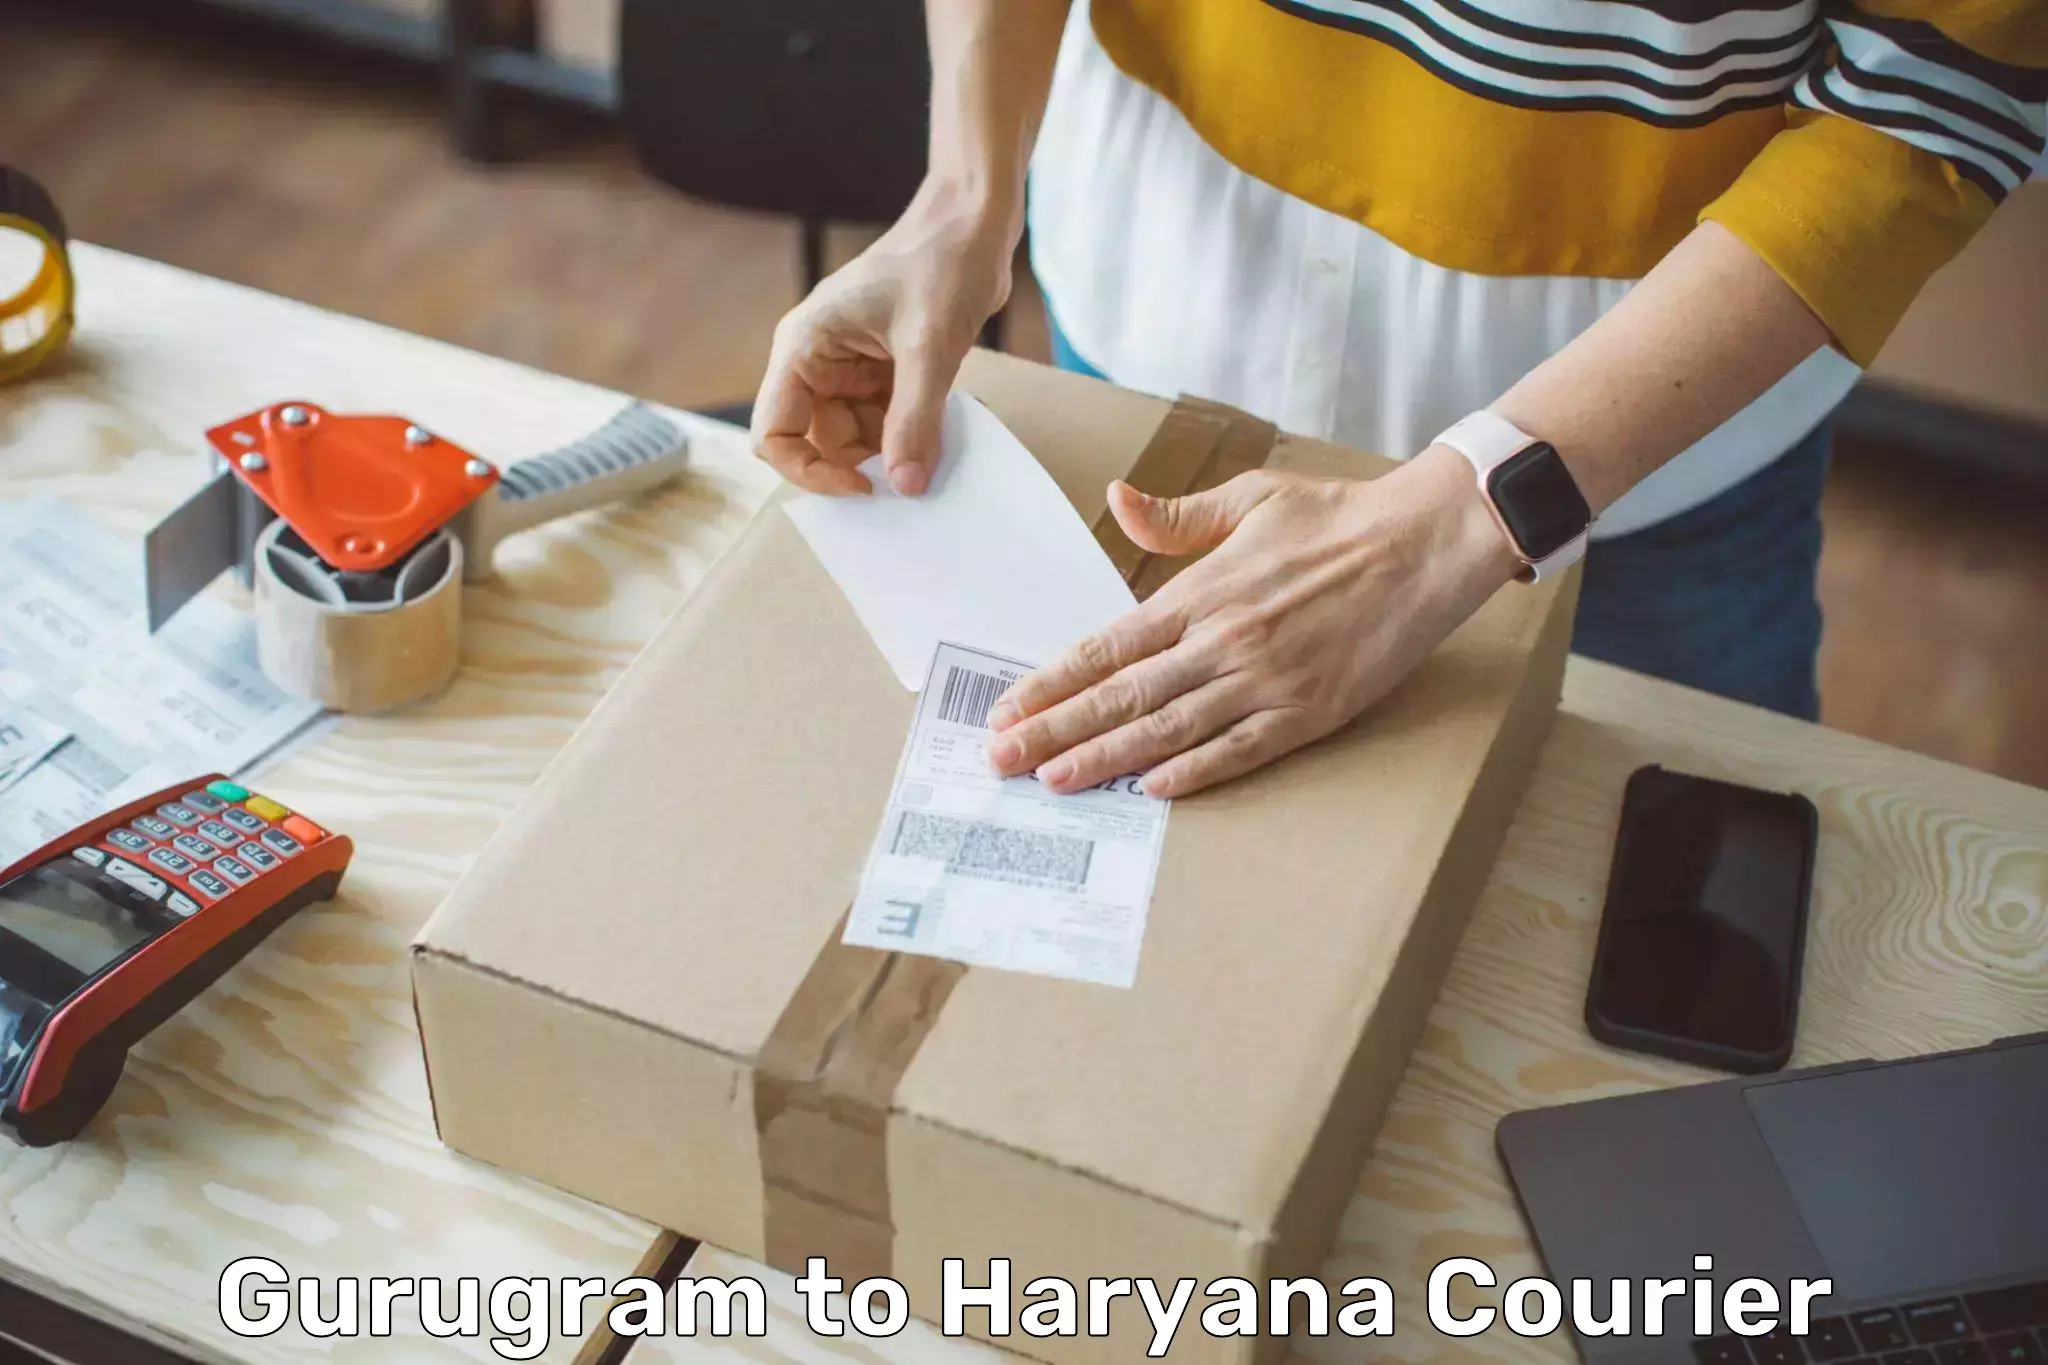 Courier service comparison Gurugram to Chaudhary Charan Singh Haryana Agricultural University Hisar